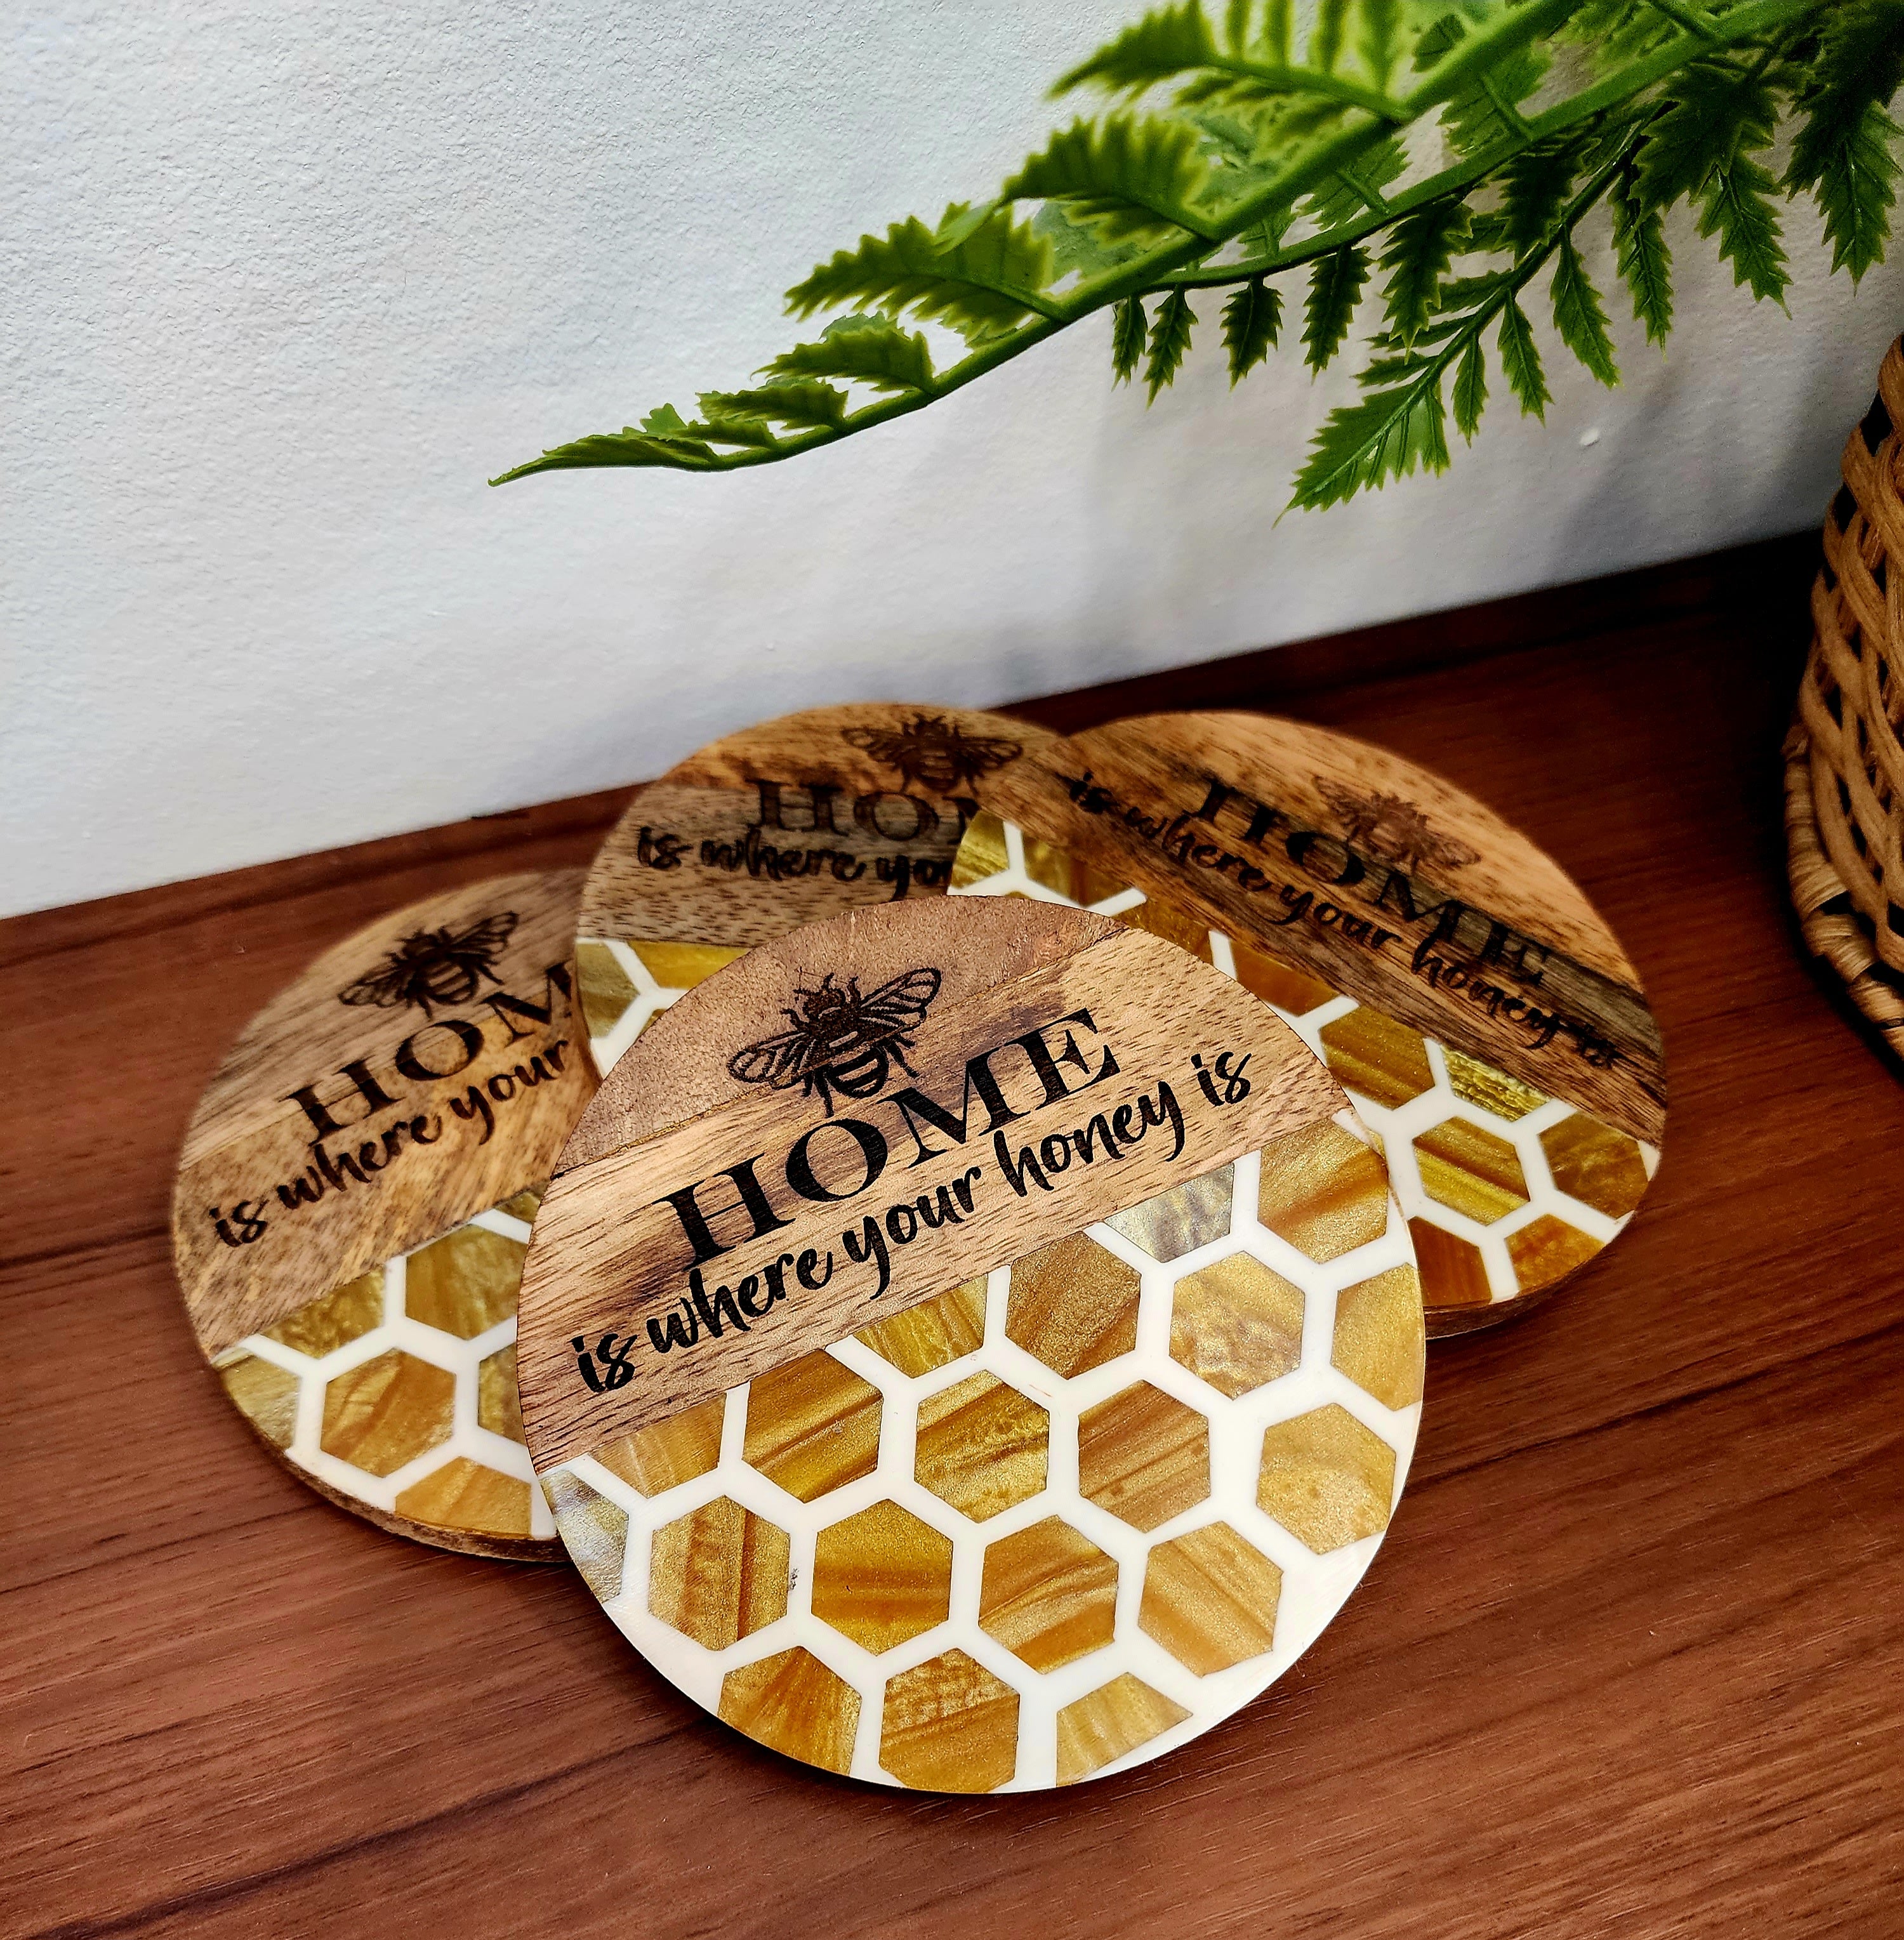 Handcrafted Wooden Drink Coasters, Handmade Epoxy Resin Art,Gift